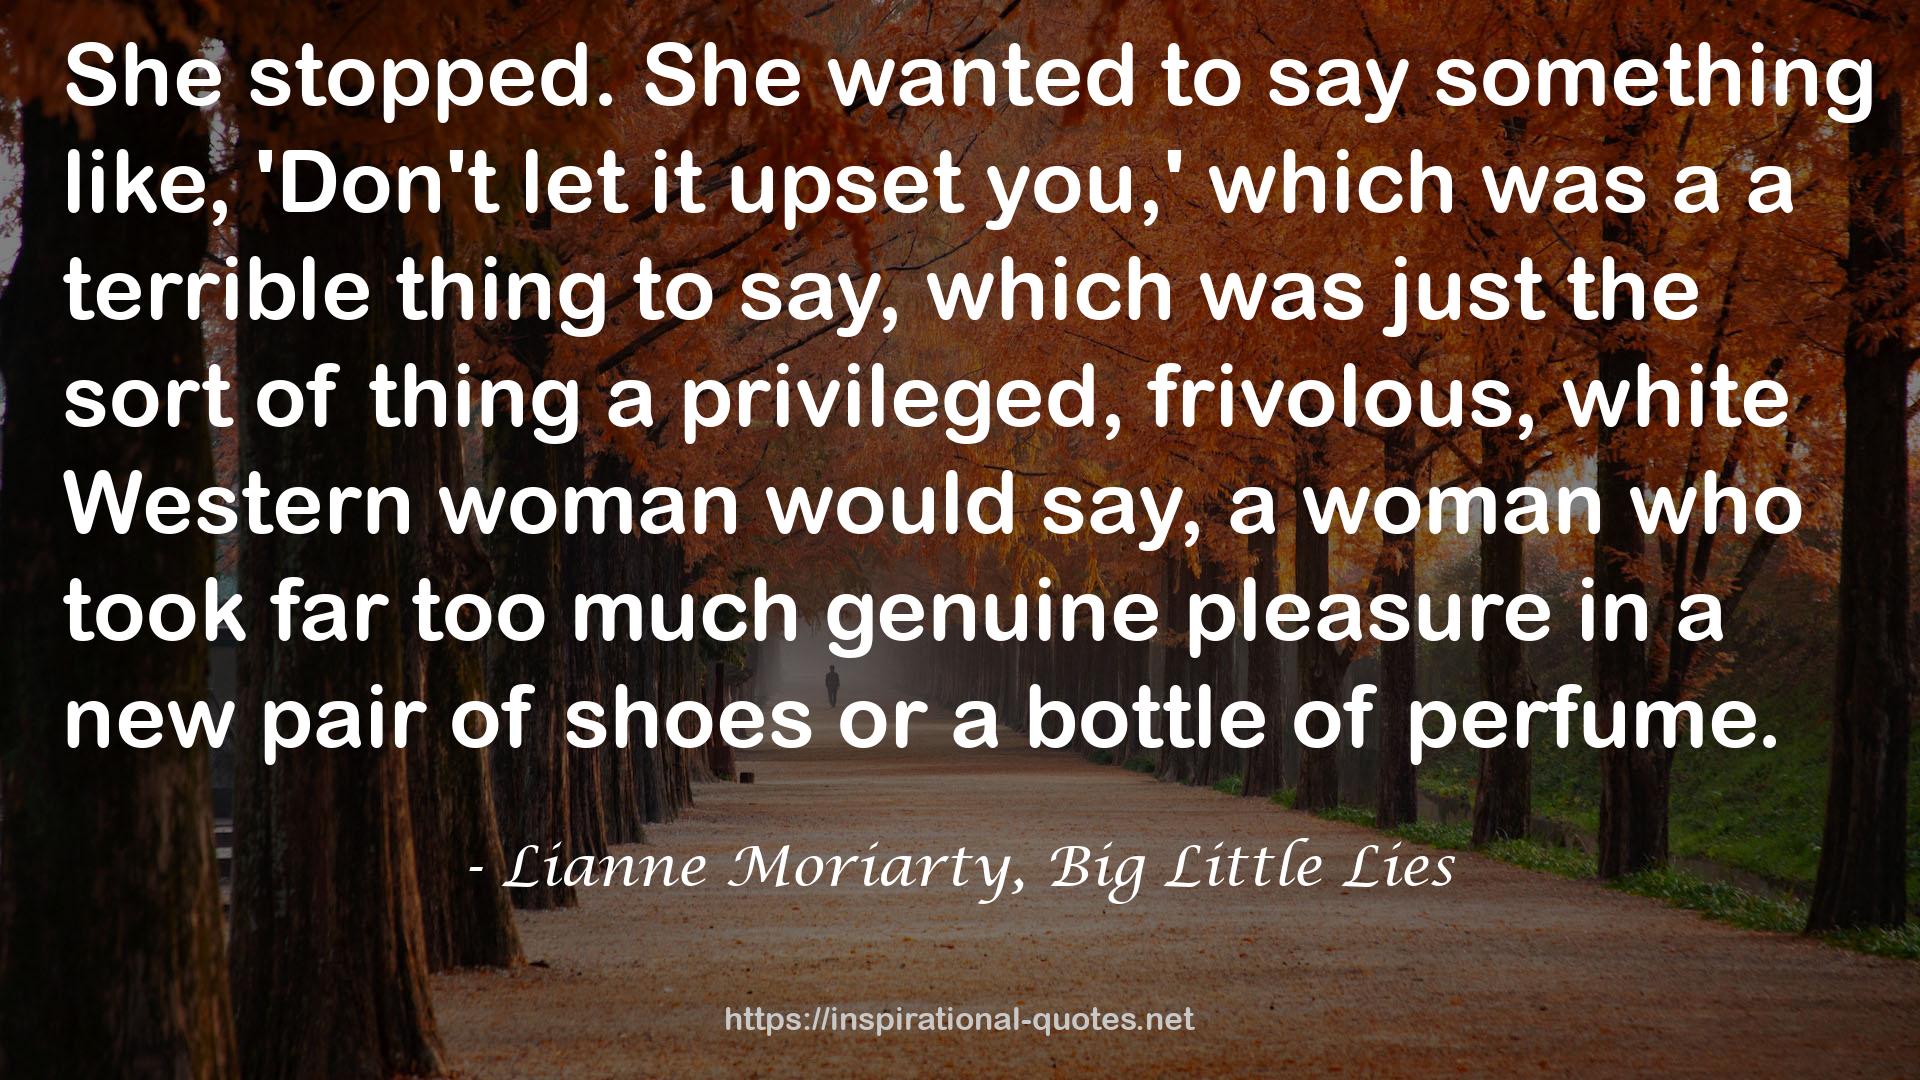 Lianne Moriarty, Big Little Lies QUOTES